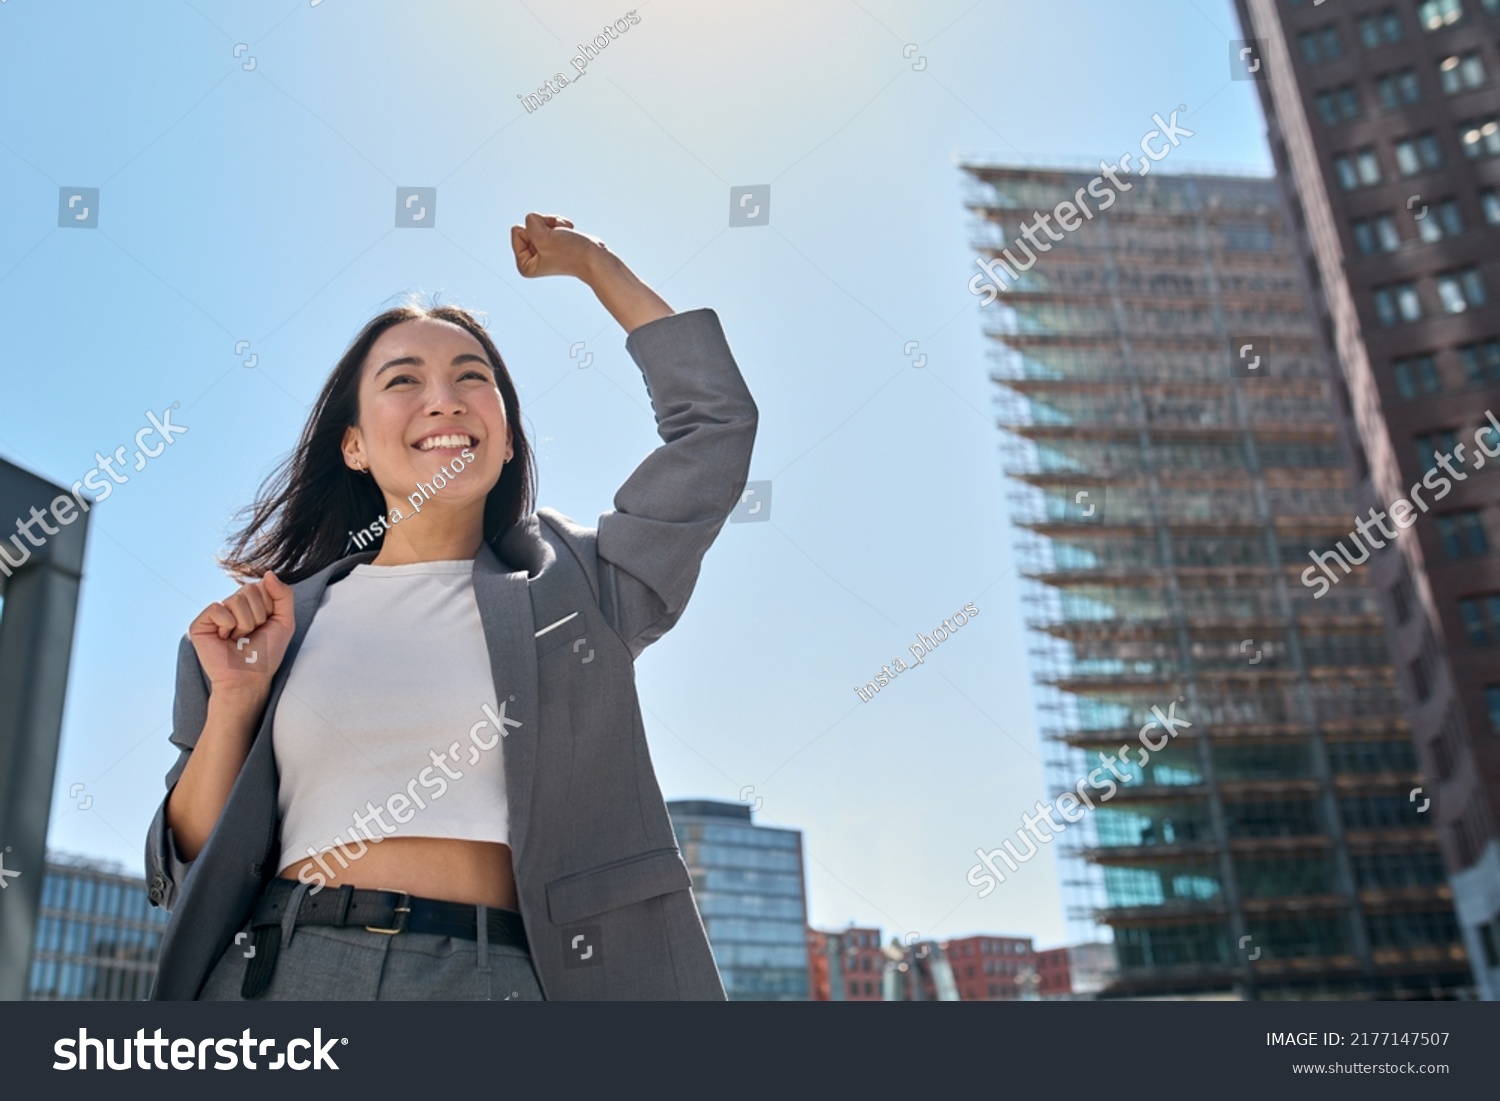 Young excited confident proud Asian business woman winner wearing suit standing on street, raising hands, feeling power, motivation, energy, celebrating career financial success in big city outdoors. #2177147507